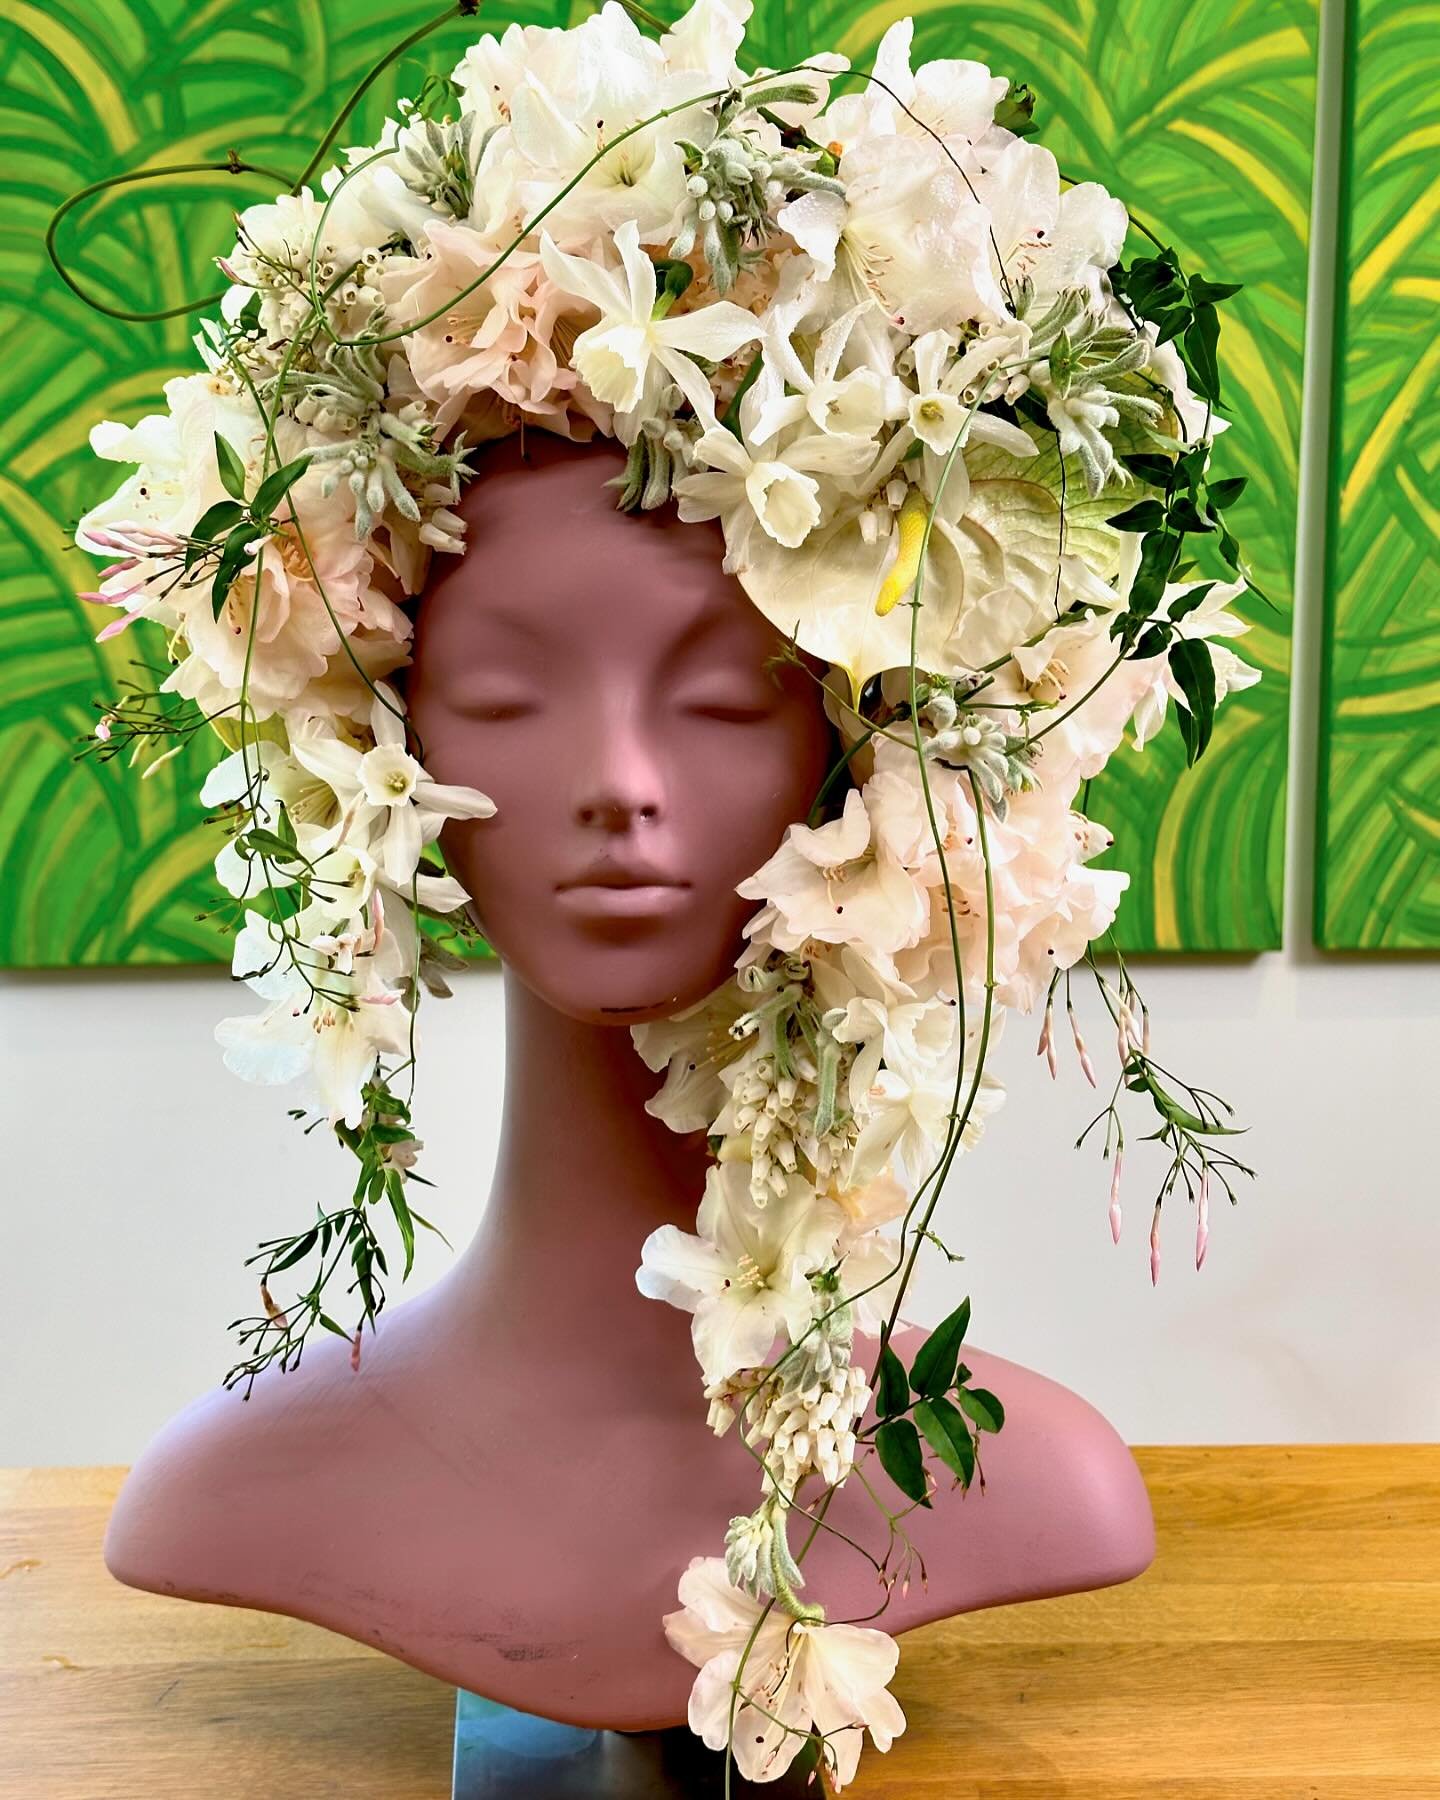 CAPTURE the Fleeting Moment of the Season in a Flower Crown!! My beautiful Rhododendron clouds, Pieris and white Narcissus will be finished next week if I don&rsquo;t capture them in an ethereal, temporary design today!!! This is the flowered finish 